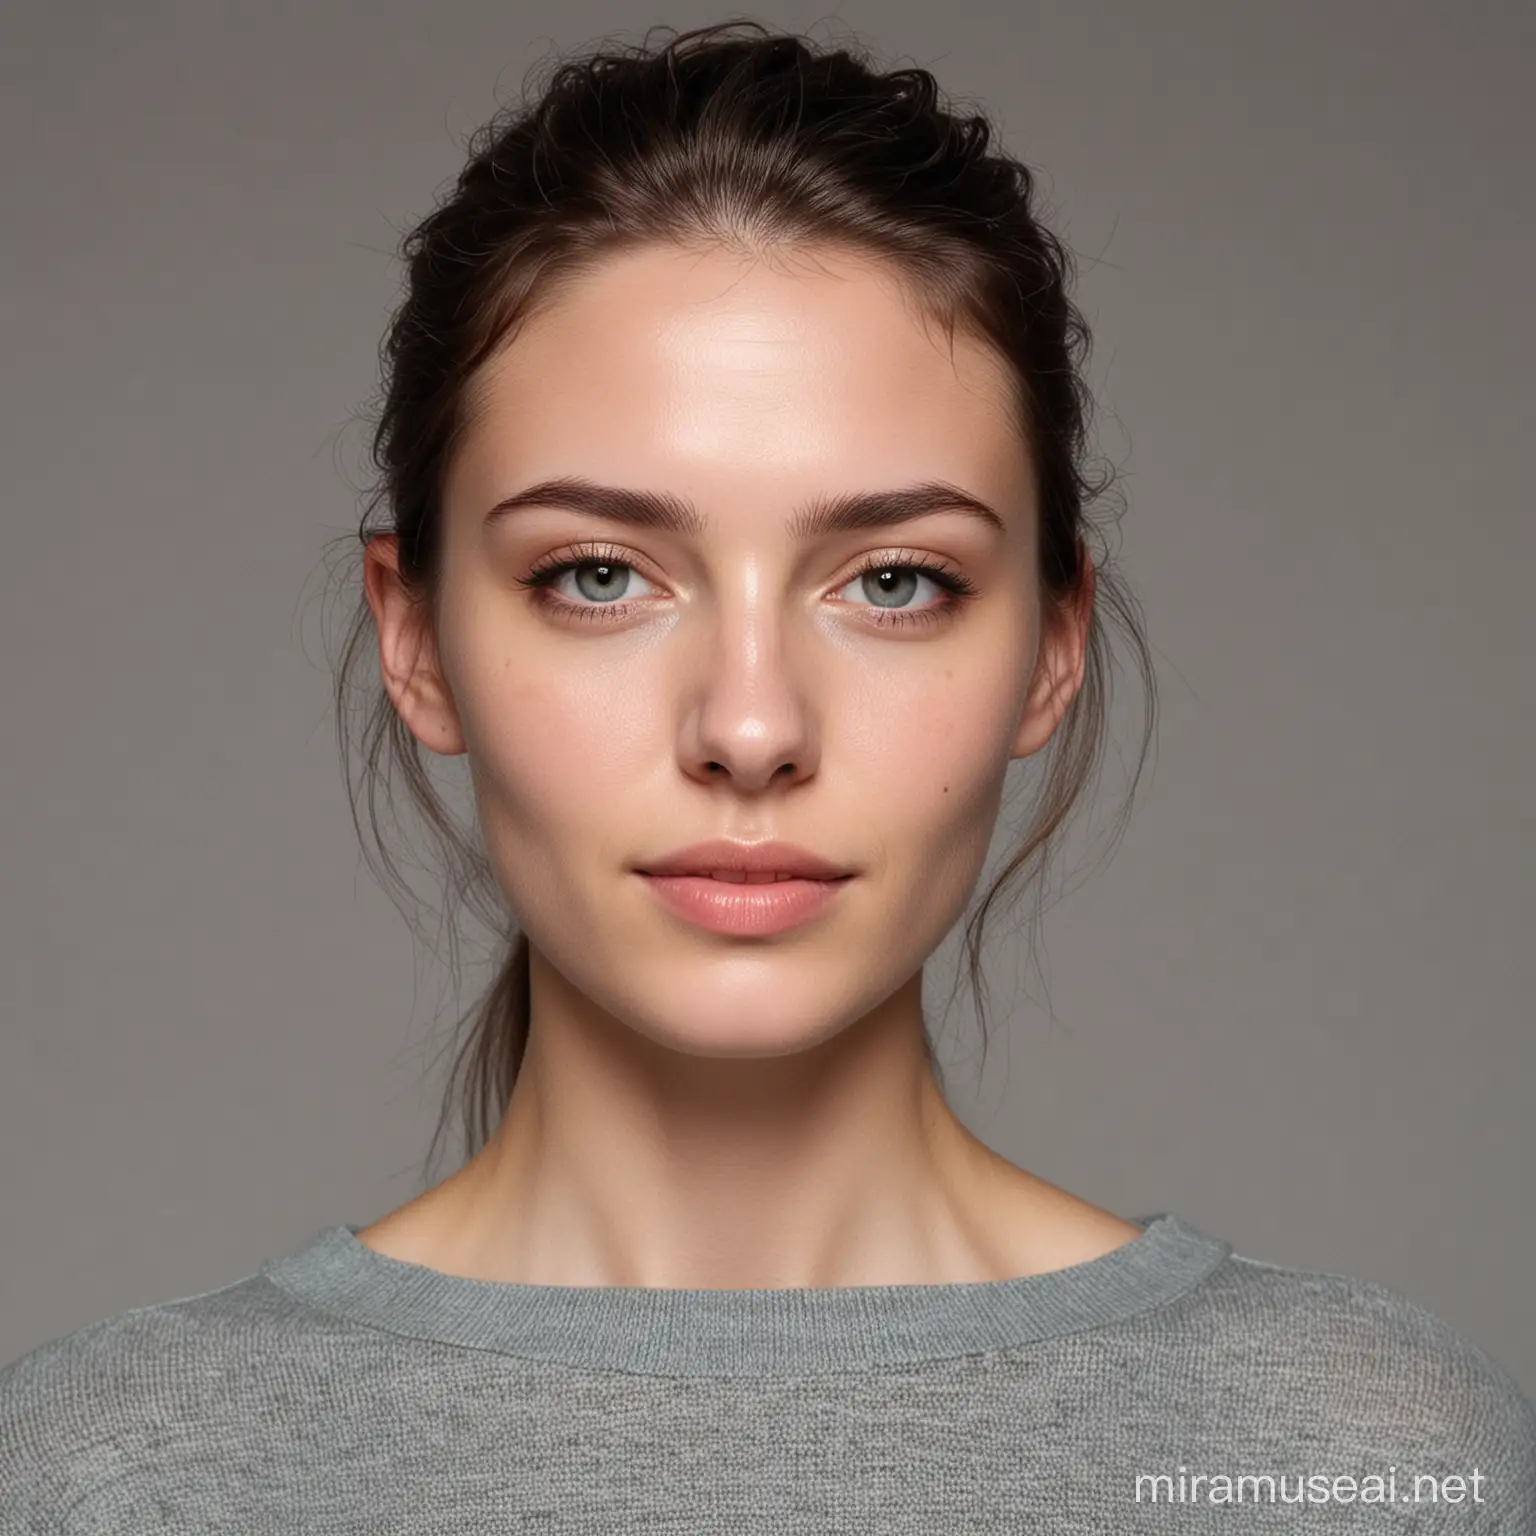 European and American 25YearOld Model Portrayed in Natural Beauty Pose